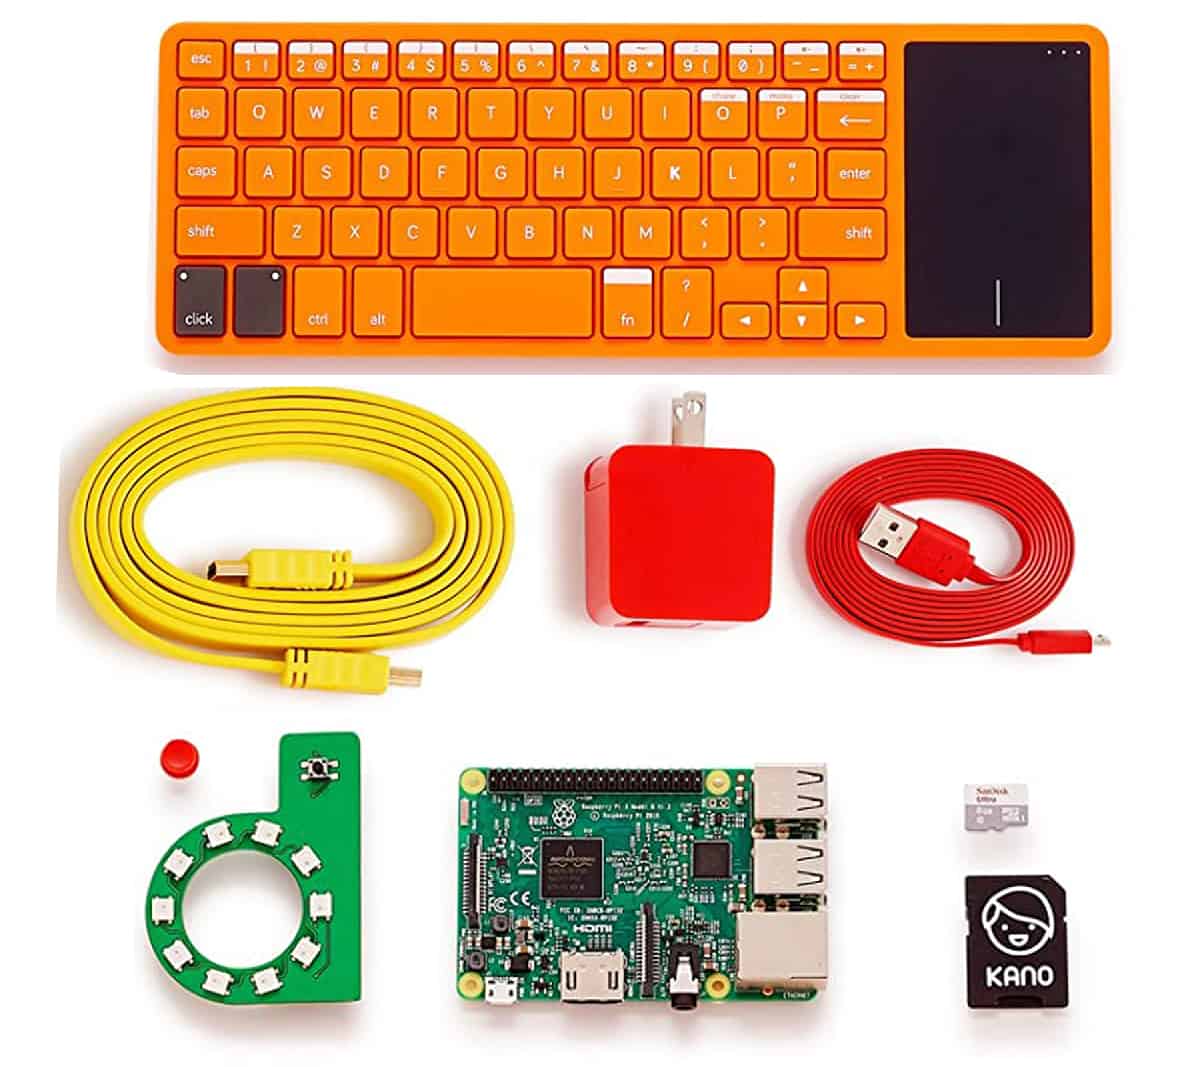 Kano Computer Kit helps you build a computer and learn coding.